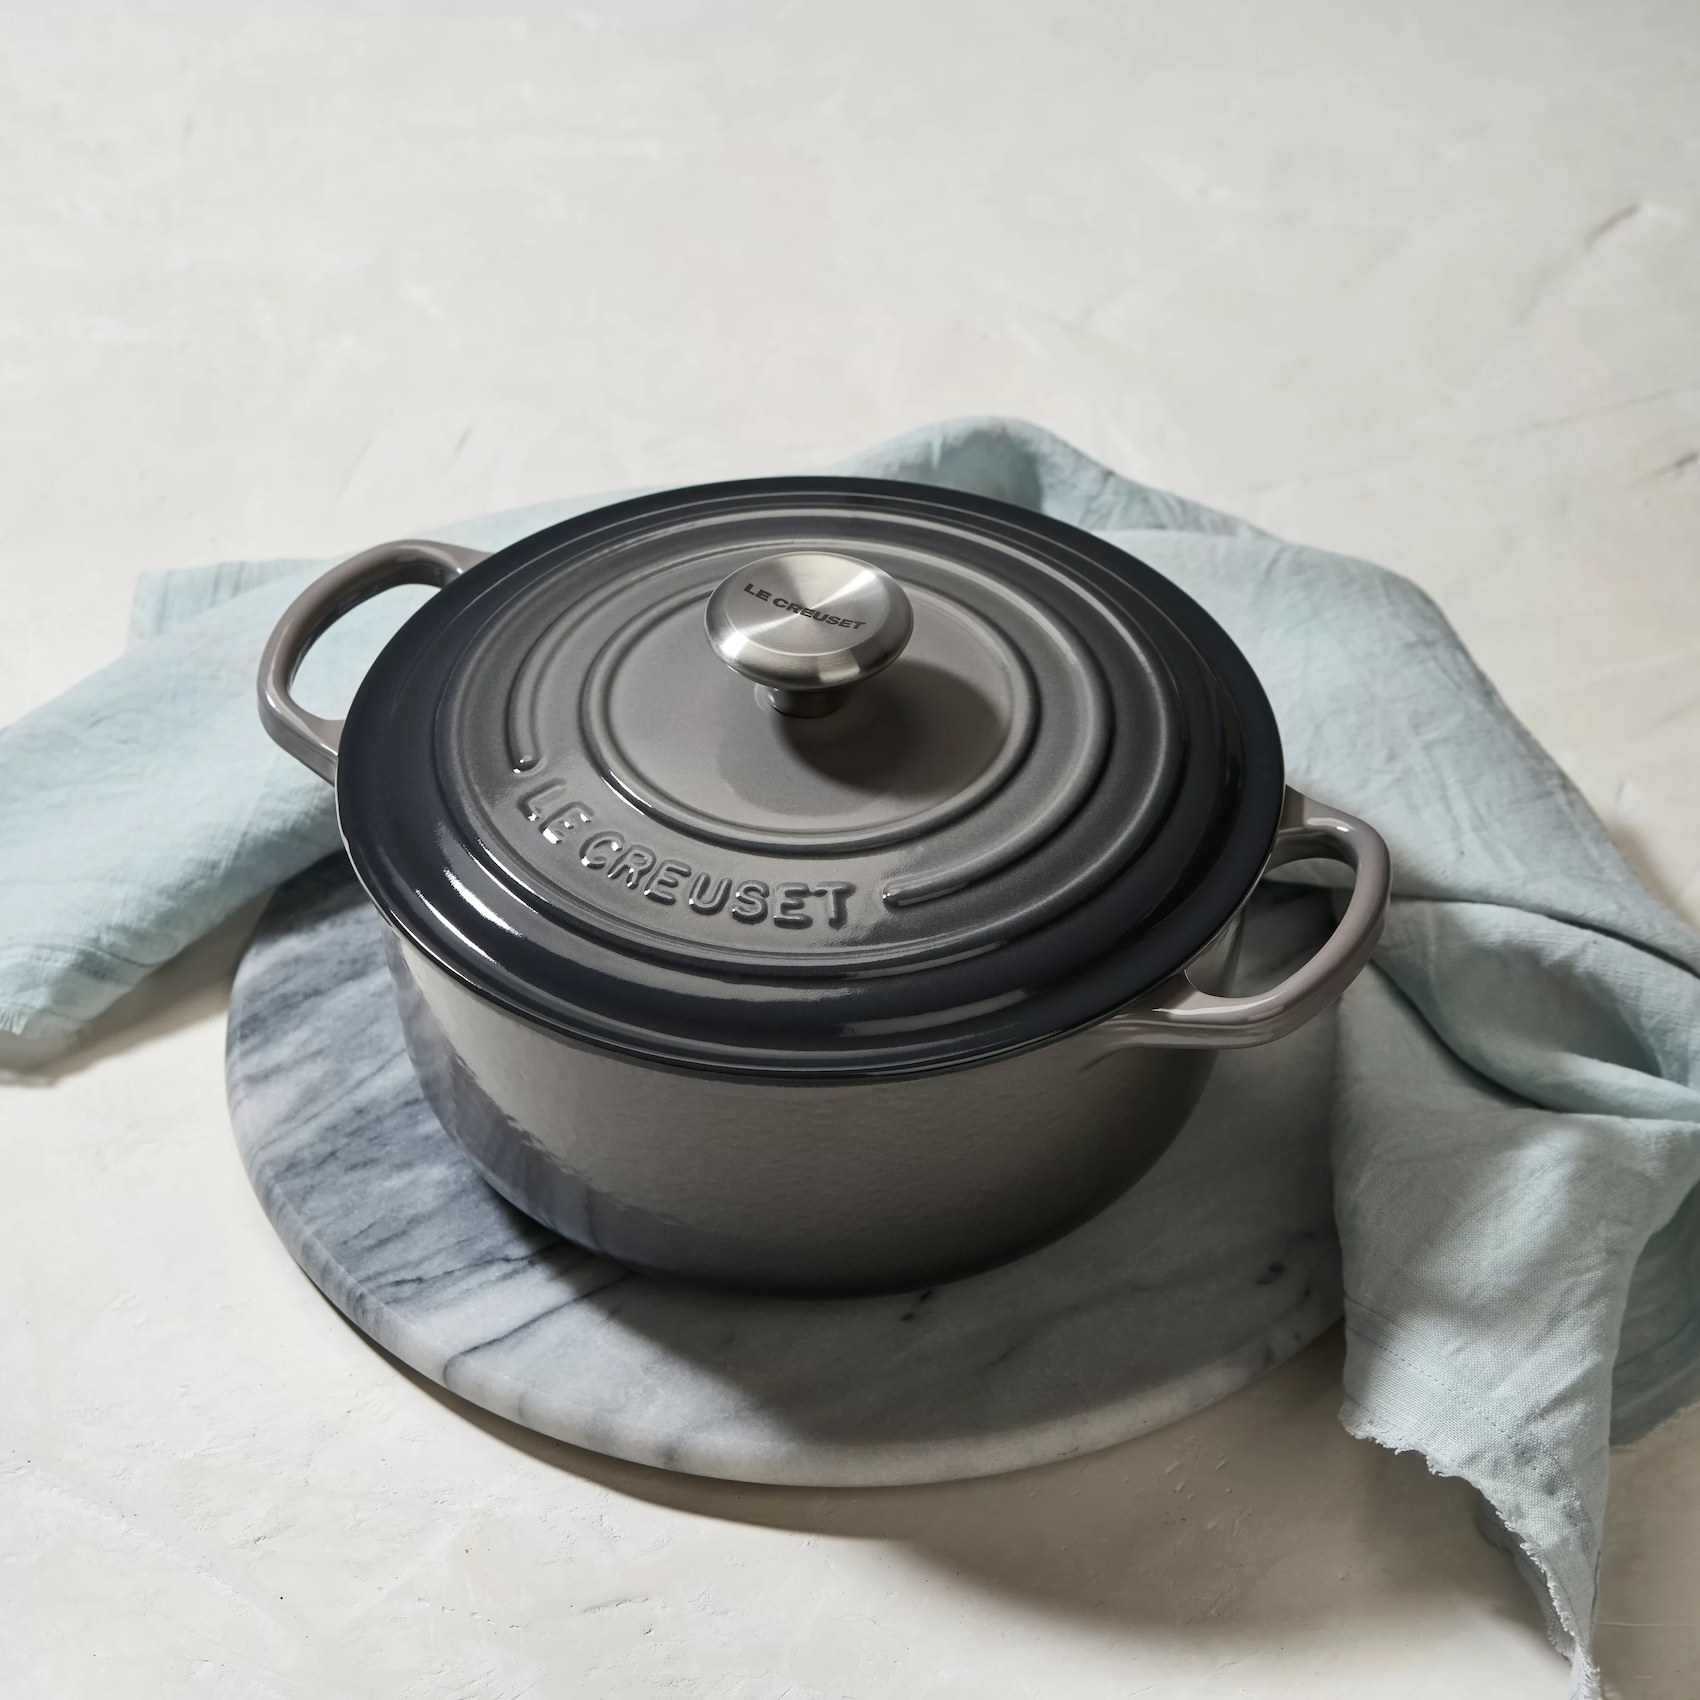 The Le Creuset Dutch oven with handles on either side and a matching lid